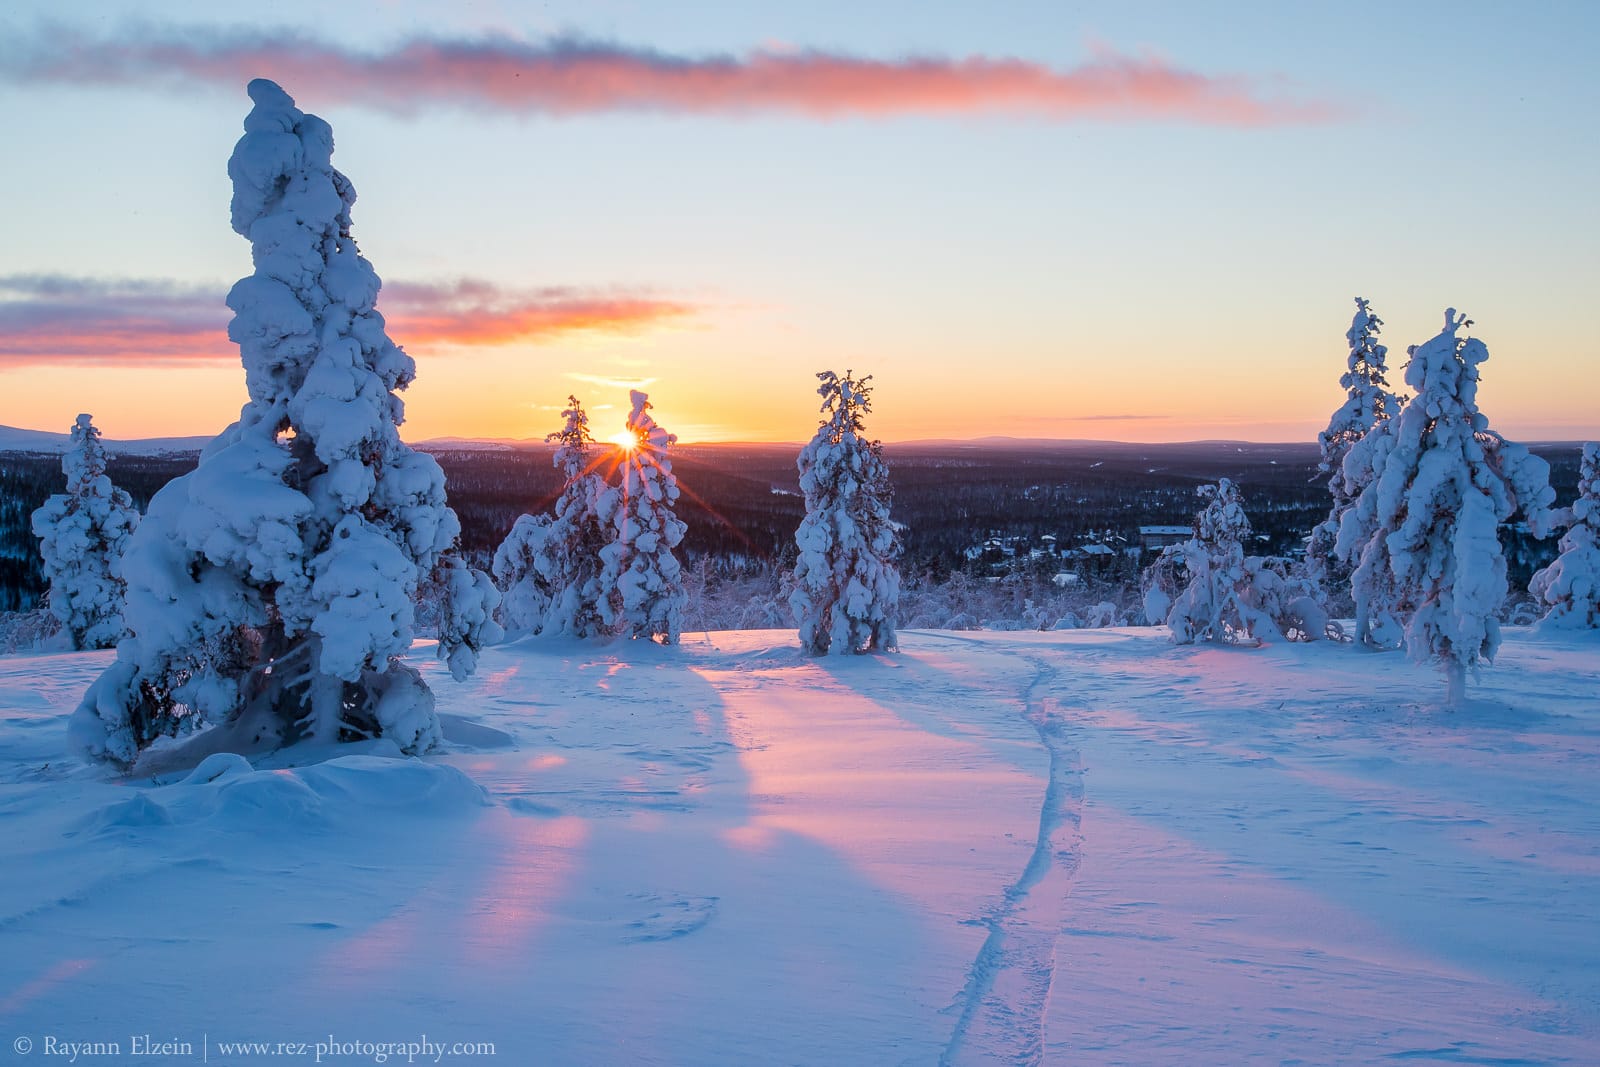 The return of the sun in Finnish Lapland